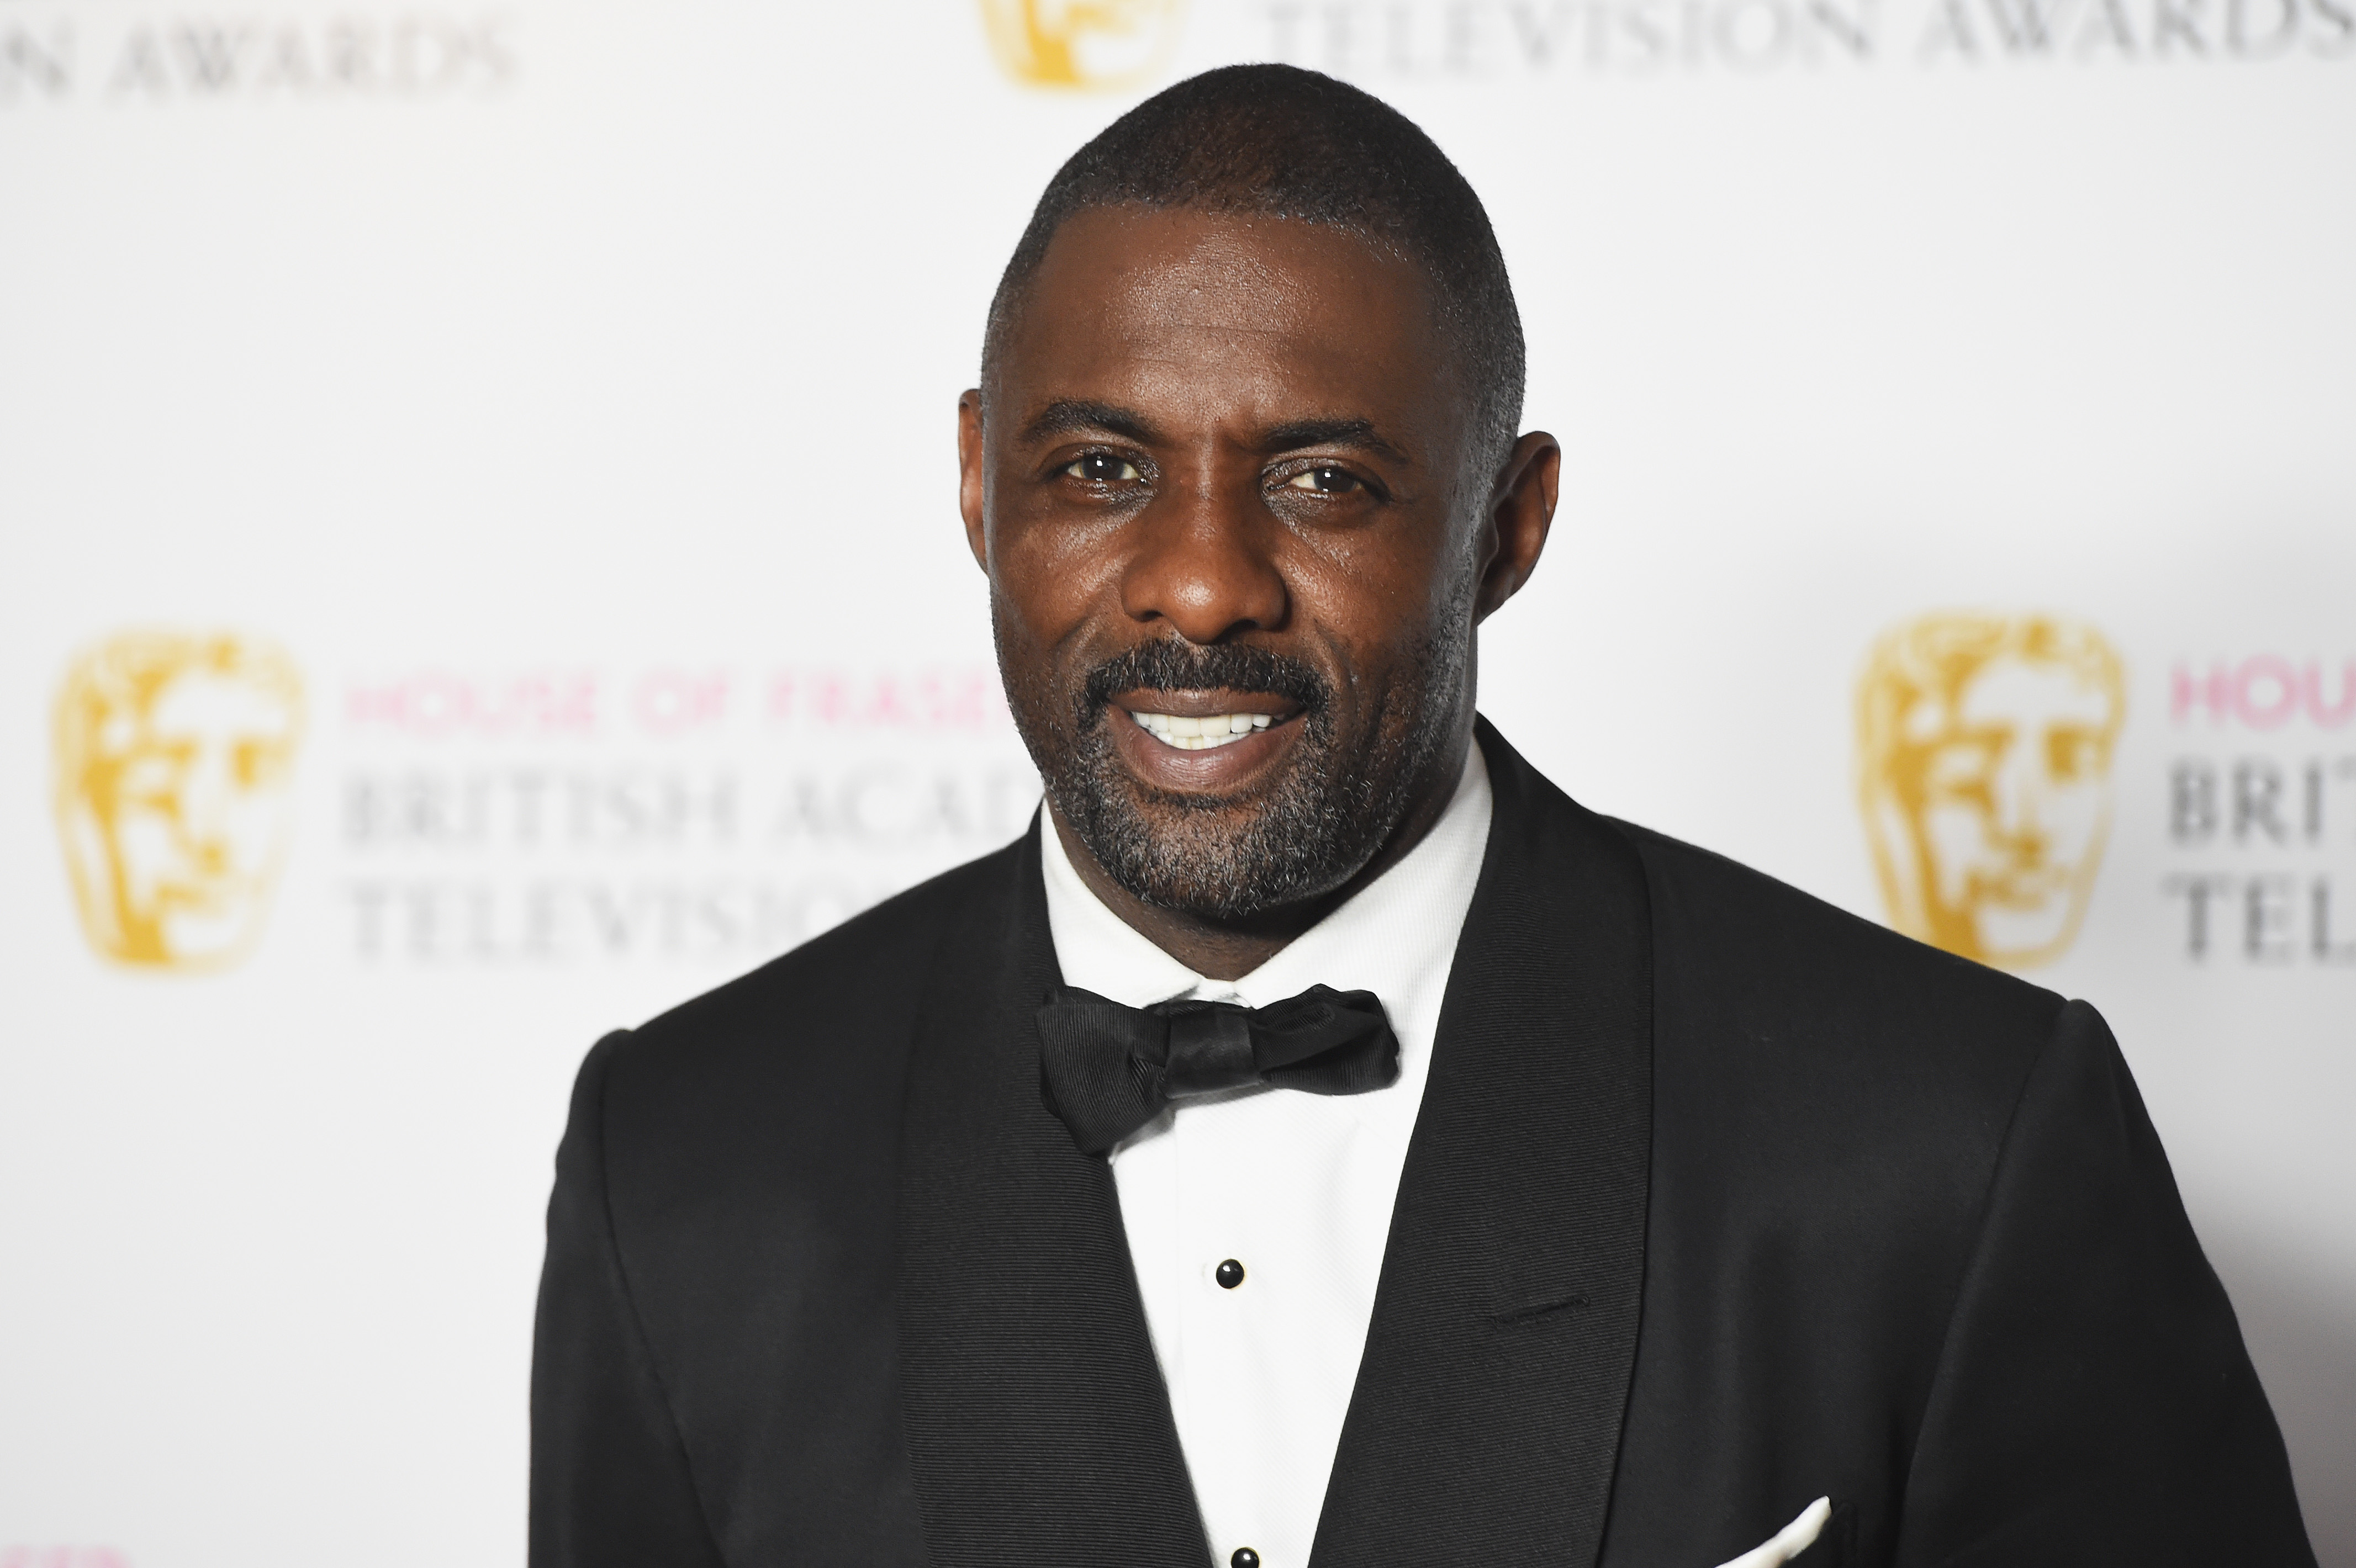 Idris Elba poses in the Winners room at the House Of Fraser British Academy Television Awards 2016 at the Royal Festival Hall on May 8, 2016 in London, England. | Source: Getty Images